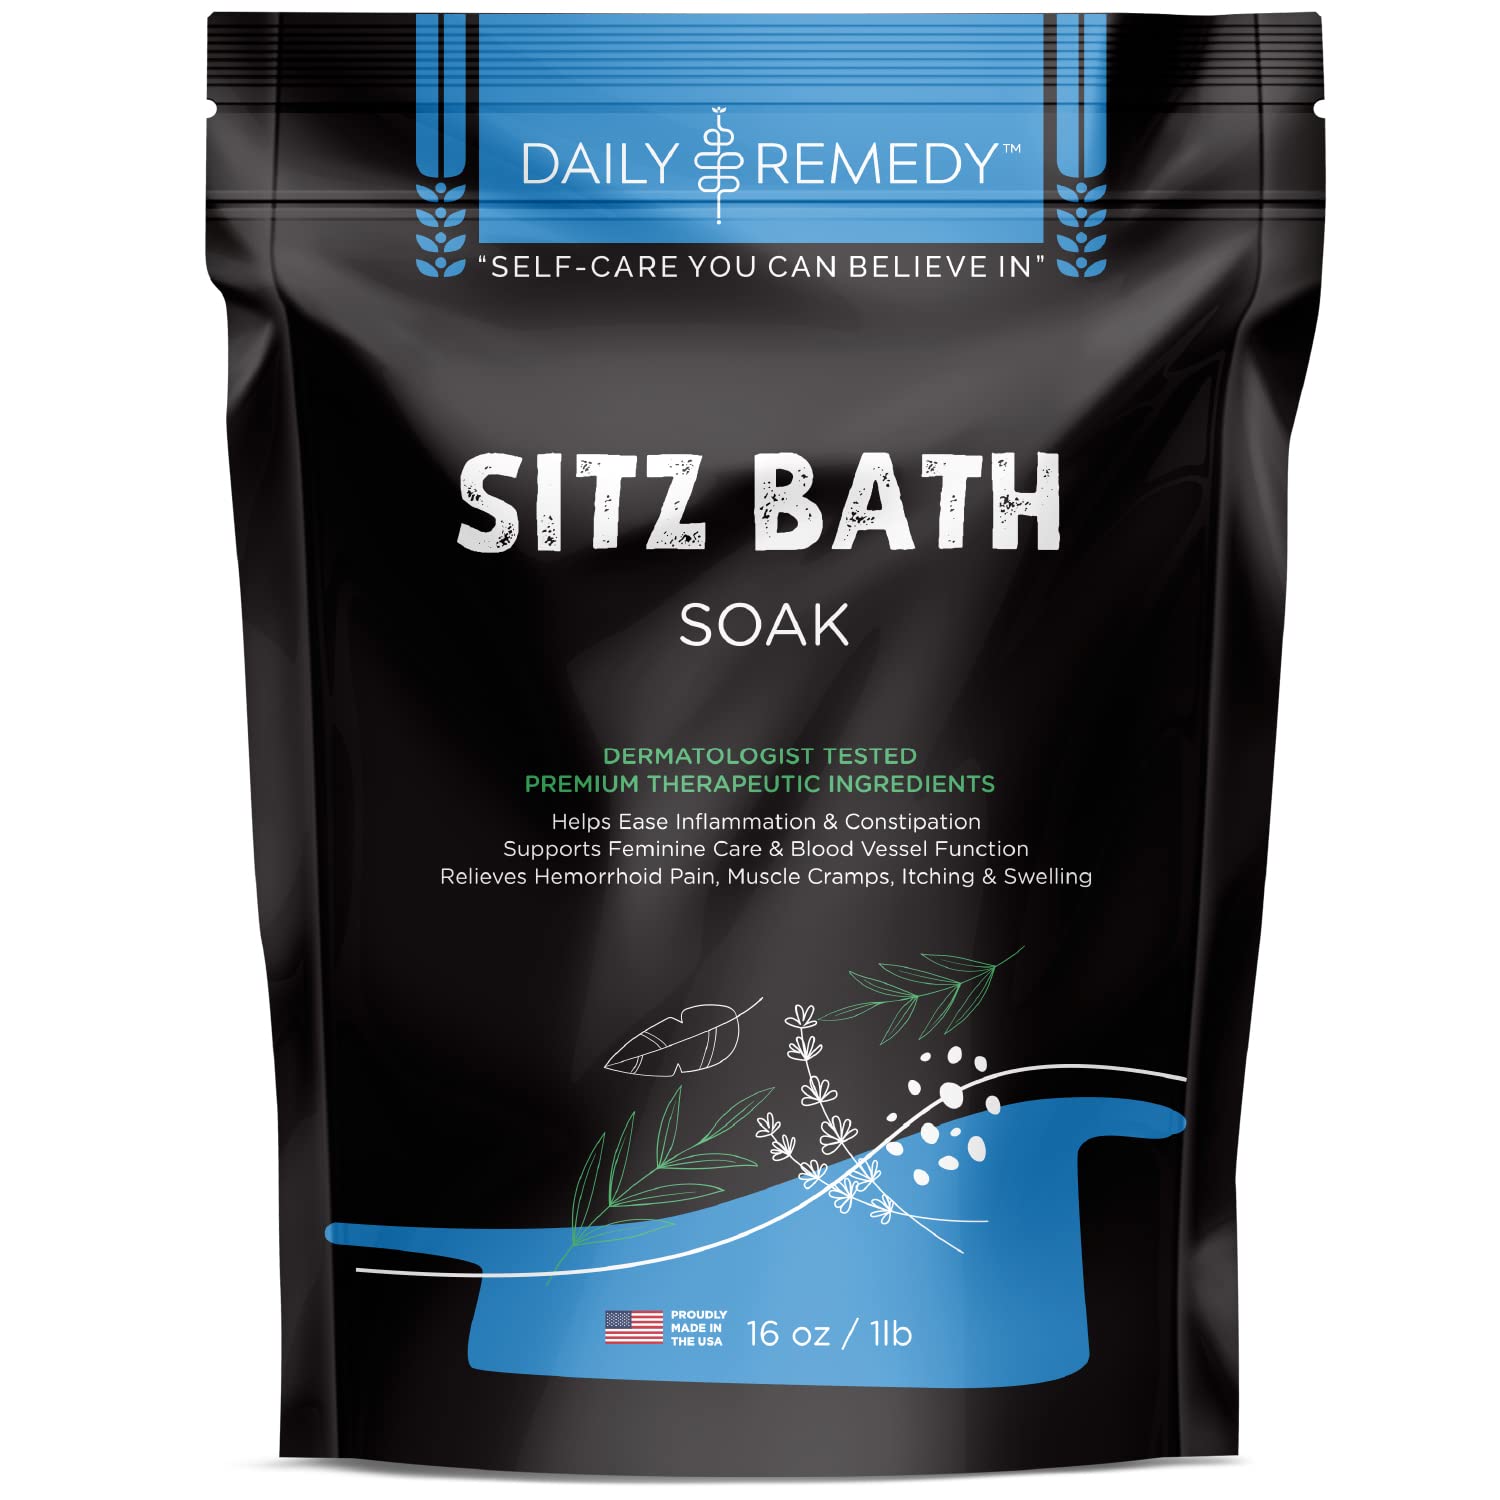 All Natural Sitz Bath Soak with Epsom Salt - Made in USA - for Postpartum Care, Hemorrhoid Treatment, Fissure Treatment & Yoni Steam - Perineal Soaking Bath That Soothes and Cleanses Inflammation